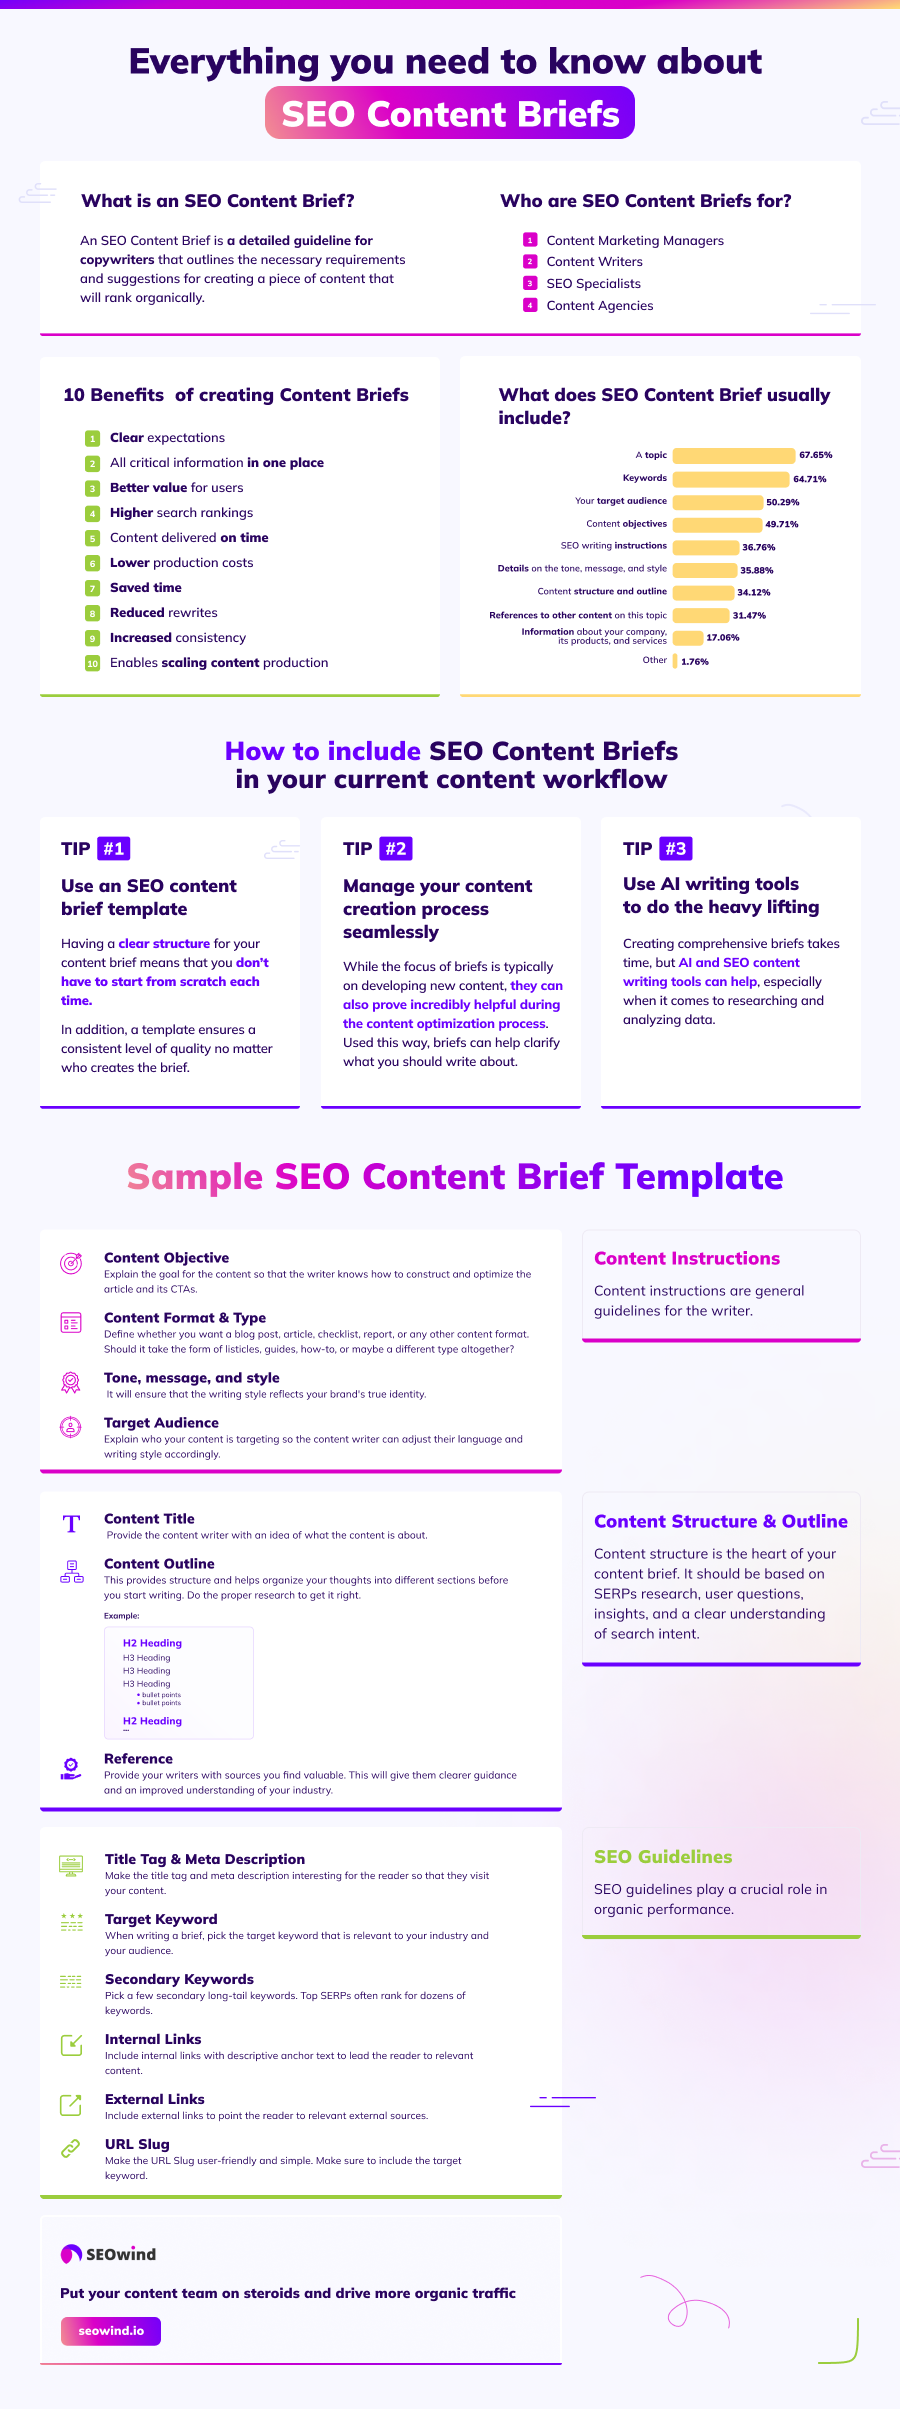 Everything you need to know about SEO Content Briefs infographic